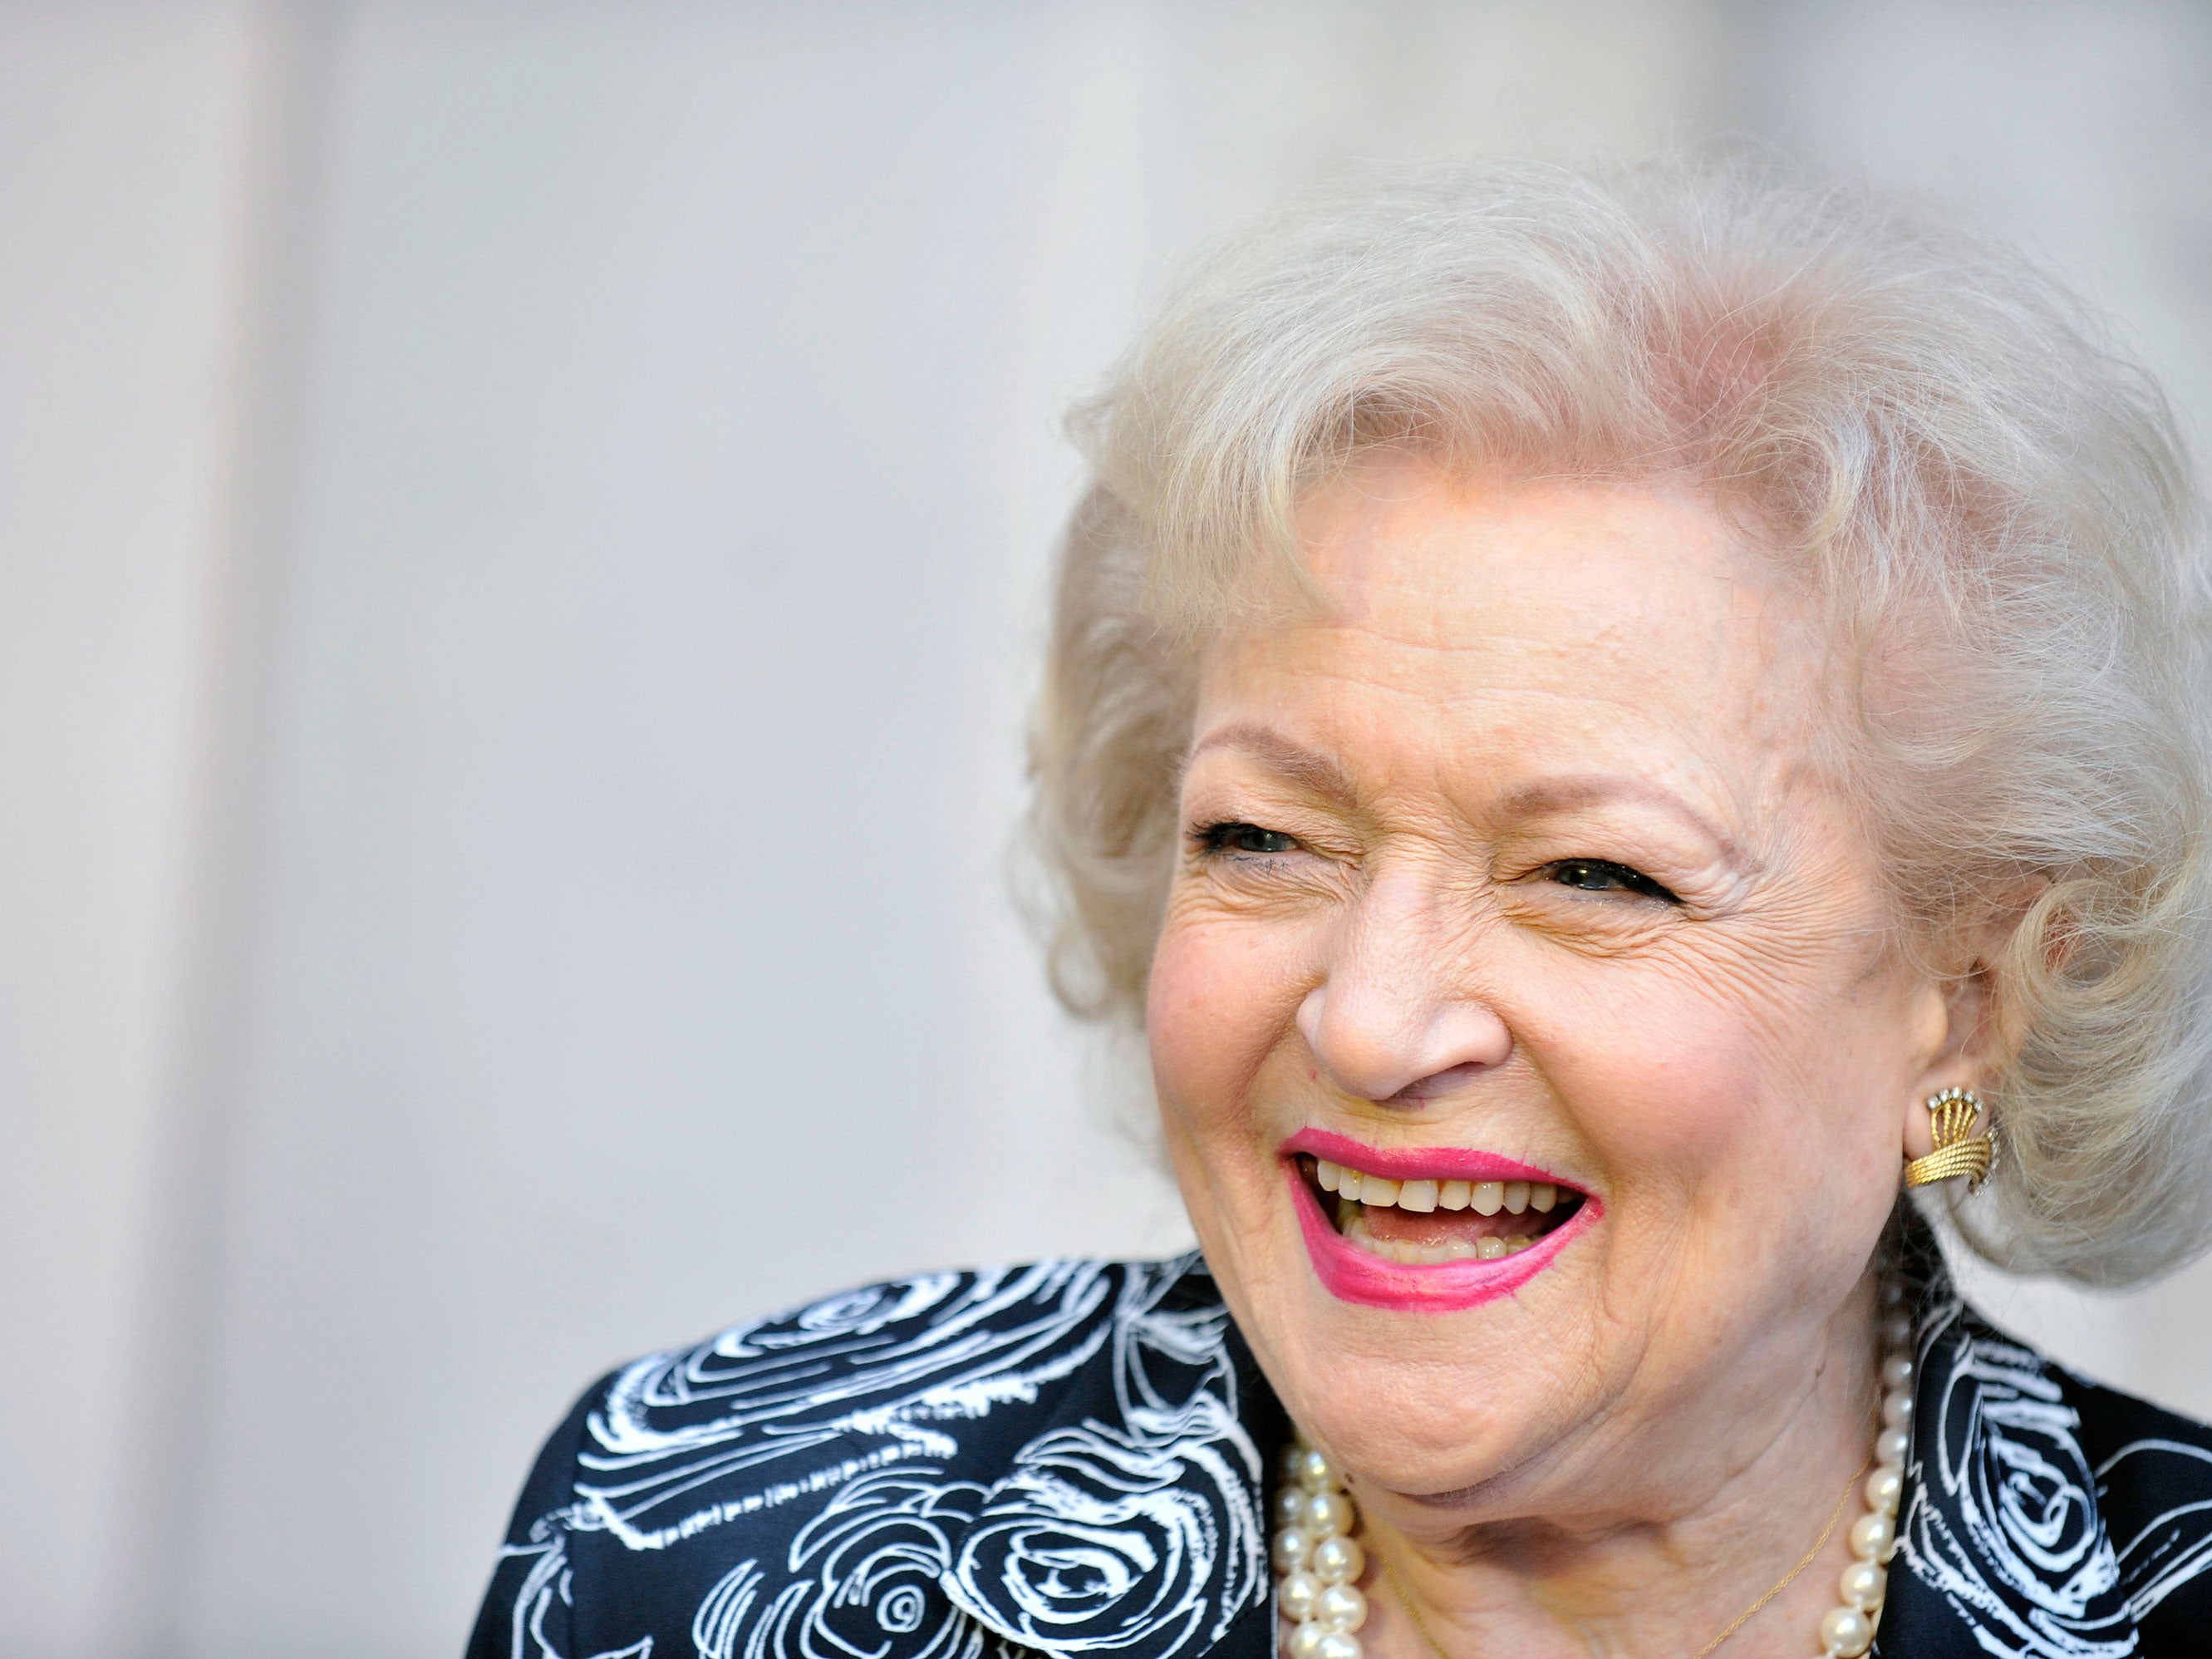 Betty White has joined Instagram